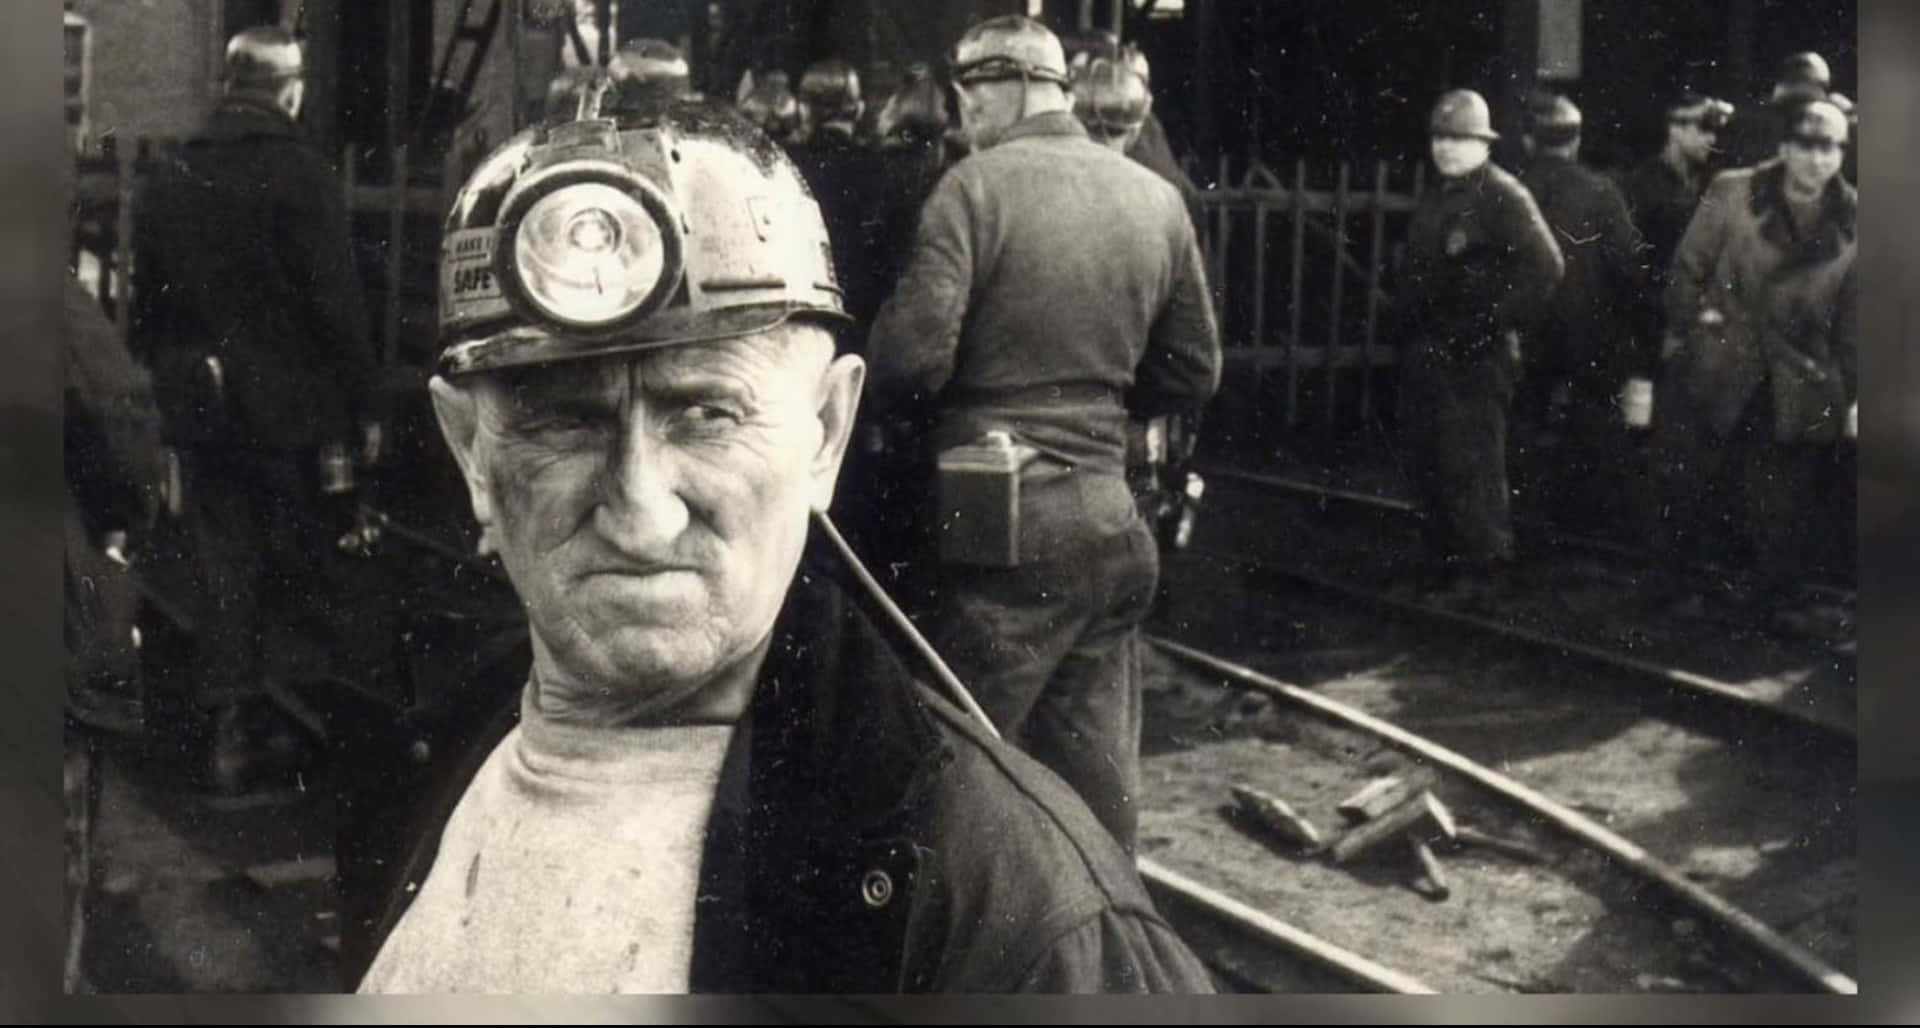 A Man In A Coal Mine With A Helmet